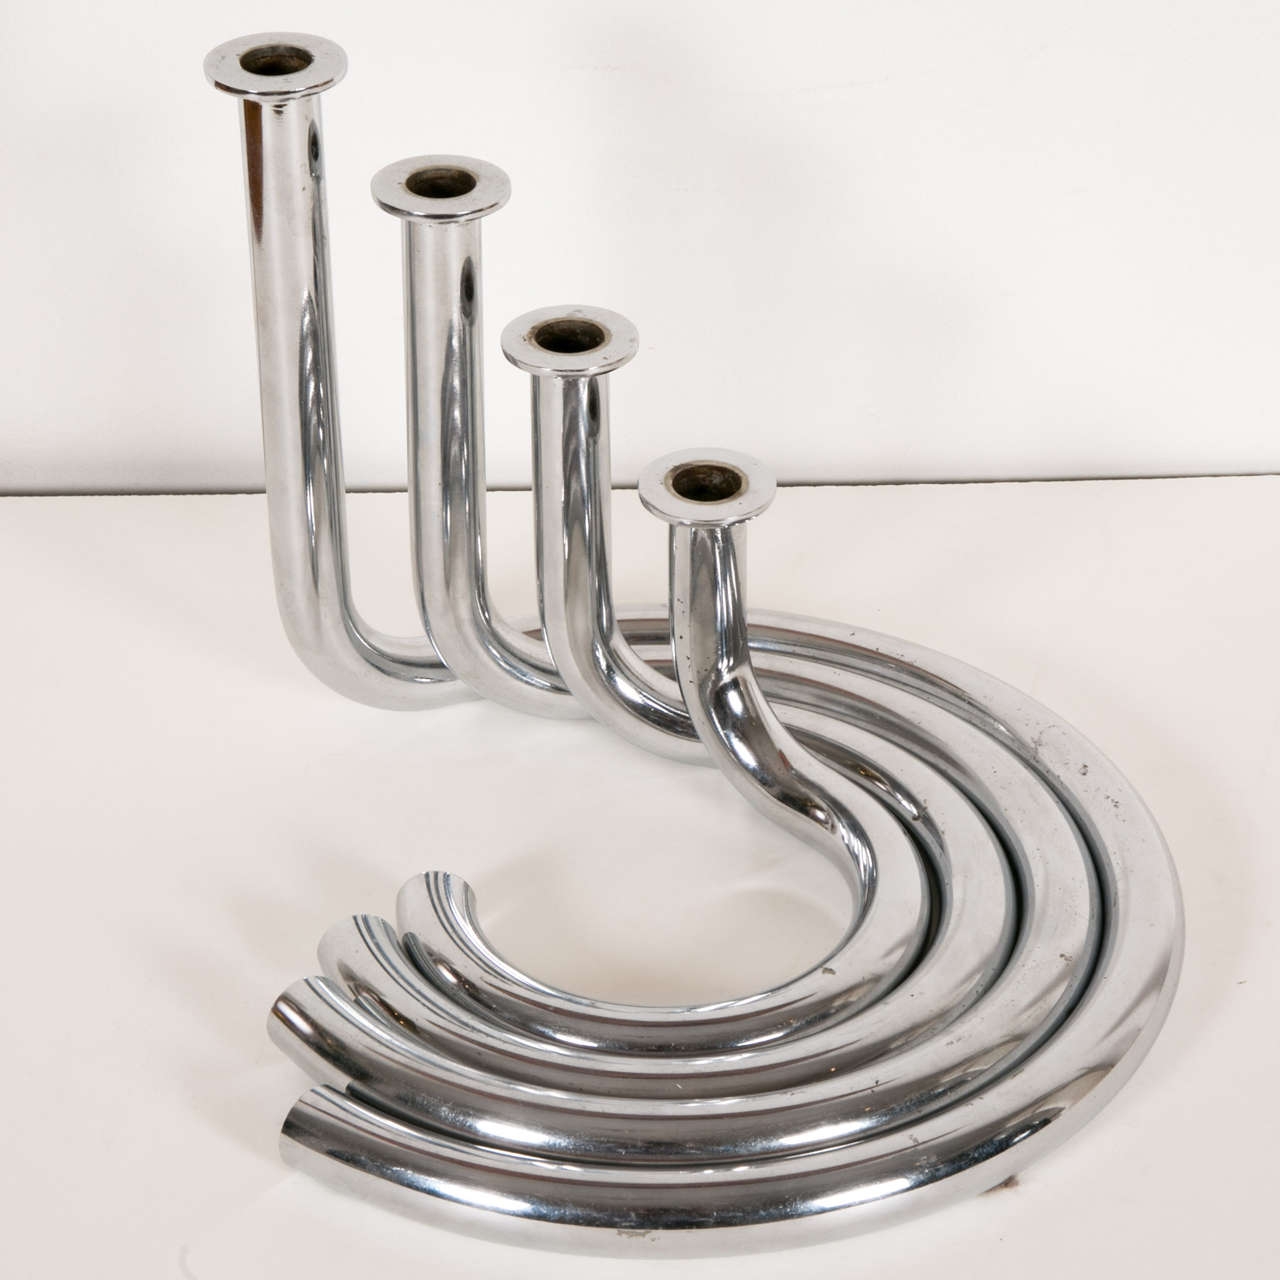 Interesting Chromed steel candleholder by Michel Boyer, 1972.
With four circular tubular removable bobeches.  

Michel BOYER (1935- 2011) interior and furniture designer, learned in the Paris Beaux Arts then at ENSAD where Arbus taught. He